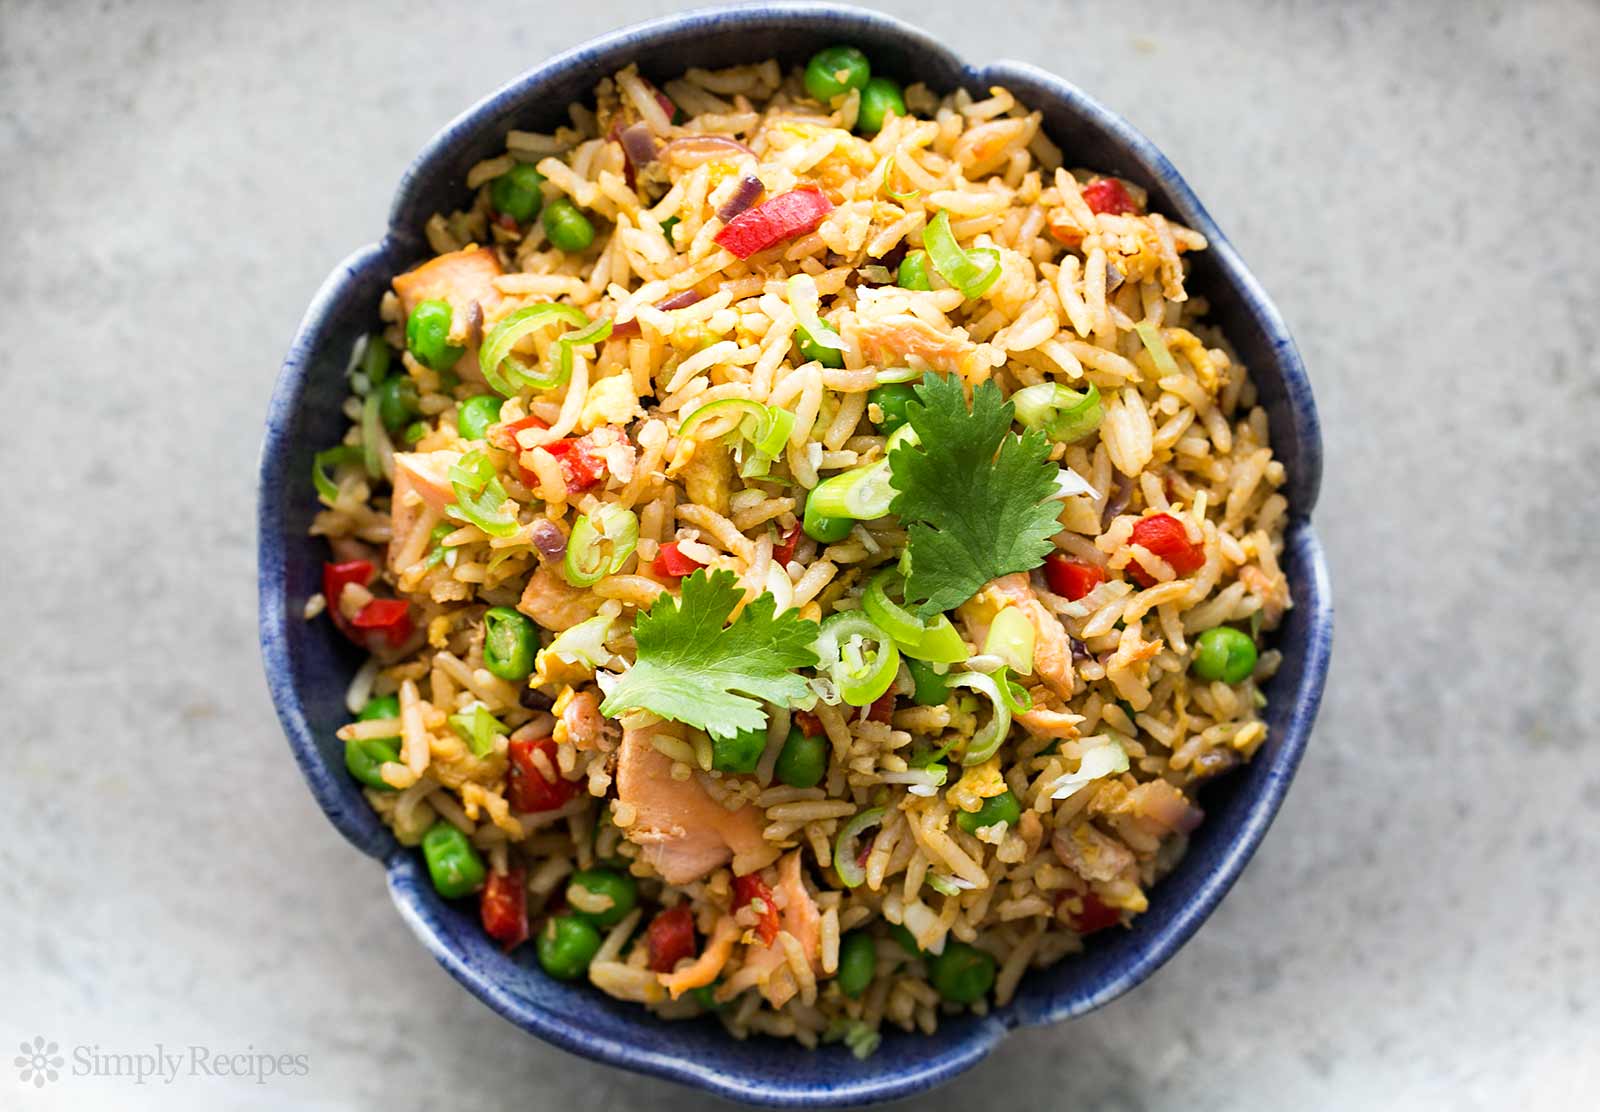 🌶 Spice up These Foods and We’ll Tell You What Color Empowers You spicy fried rice